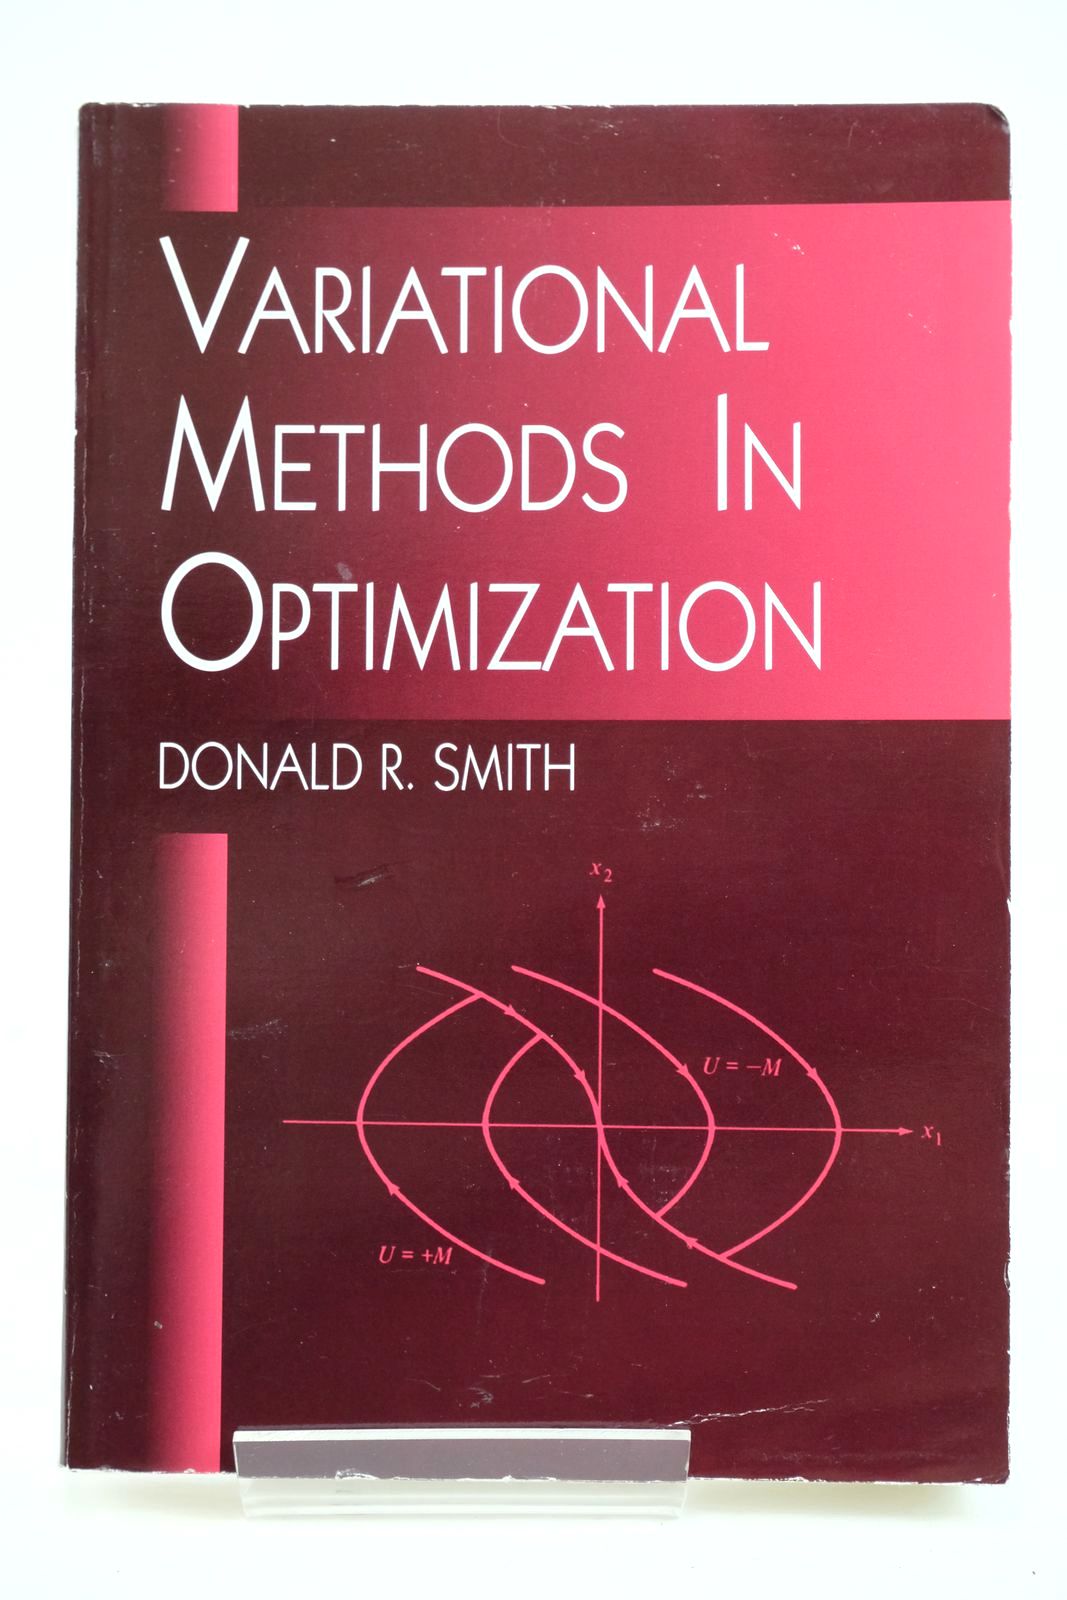 Photo of VARIATIONAL METHODS IN OPTIMIZATION written by Smith, Donald R. published by Dover Publications Inc. (STOCK CODE: 1319606)  for sale by Stella & Rose's Books